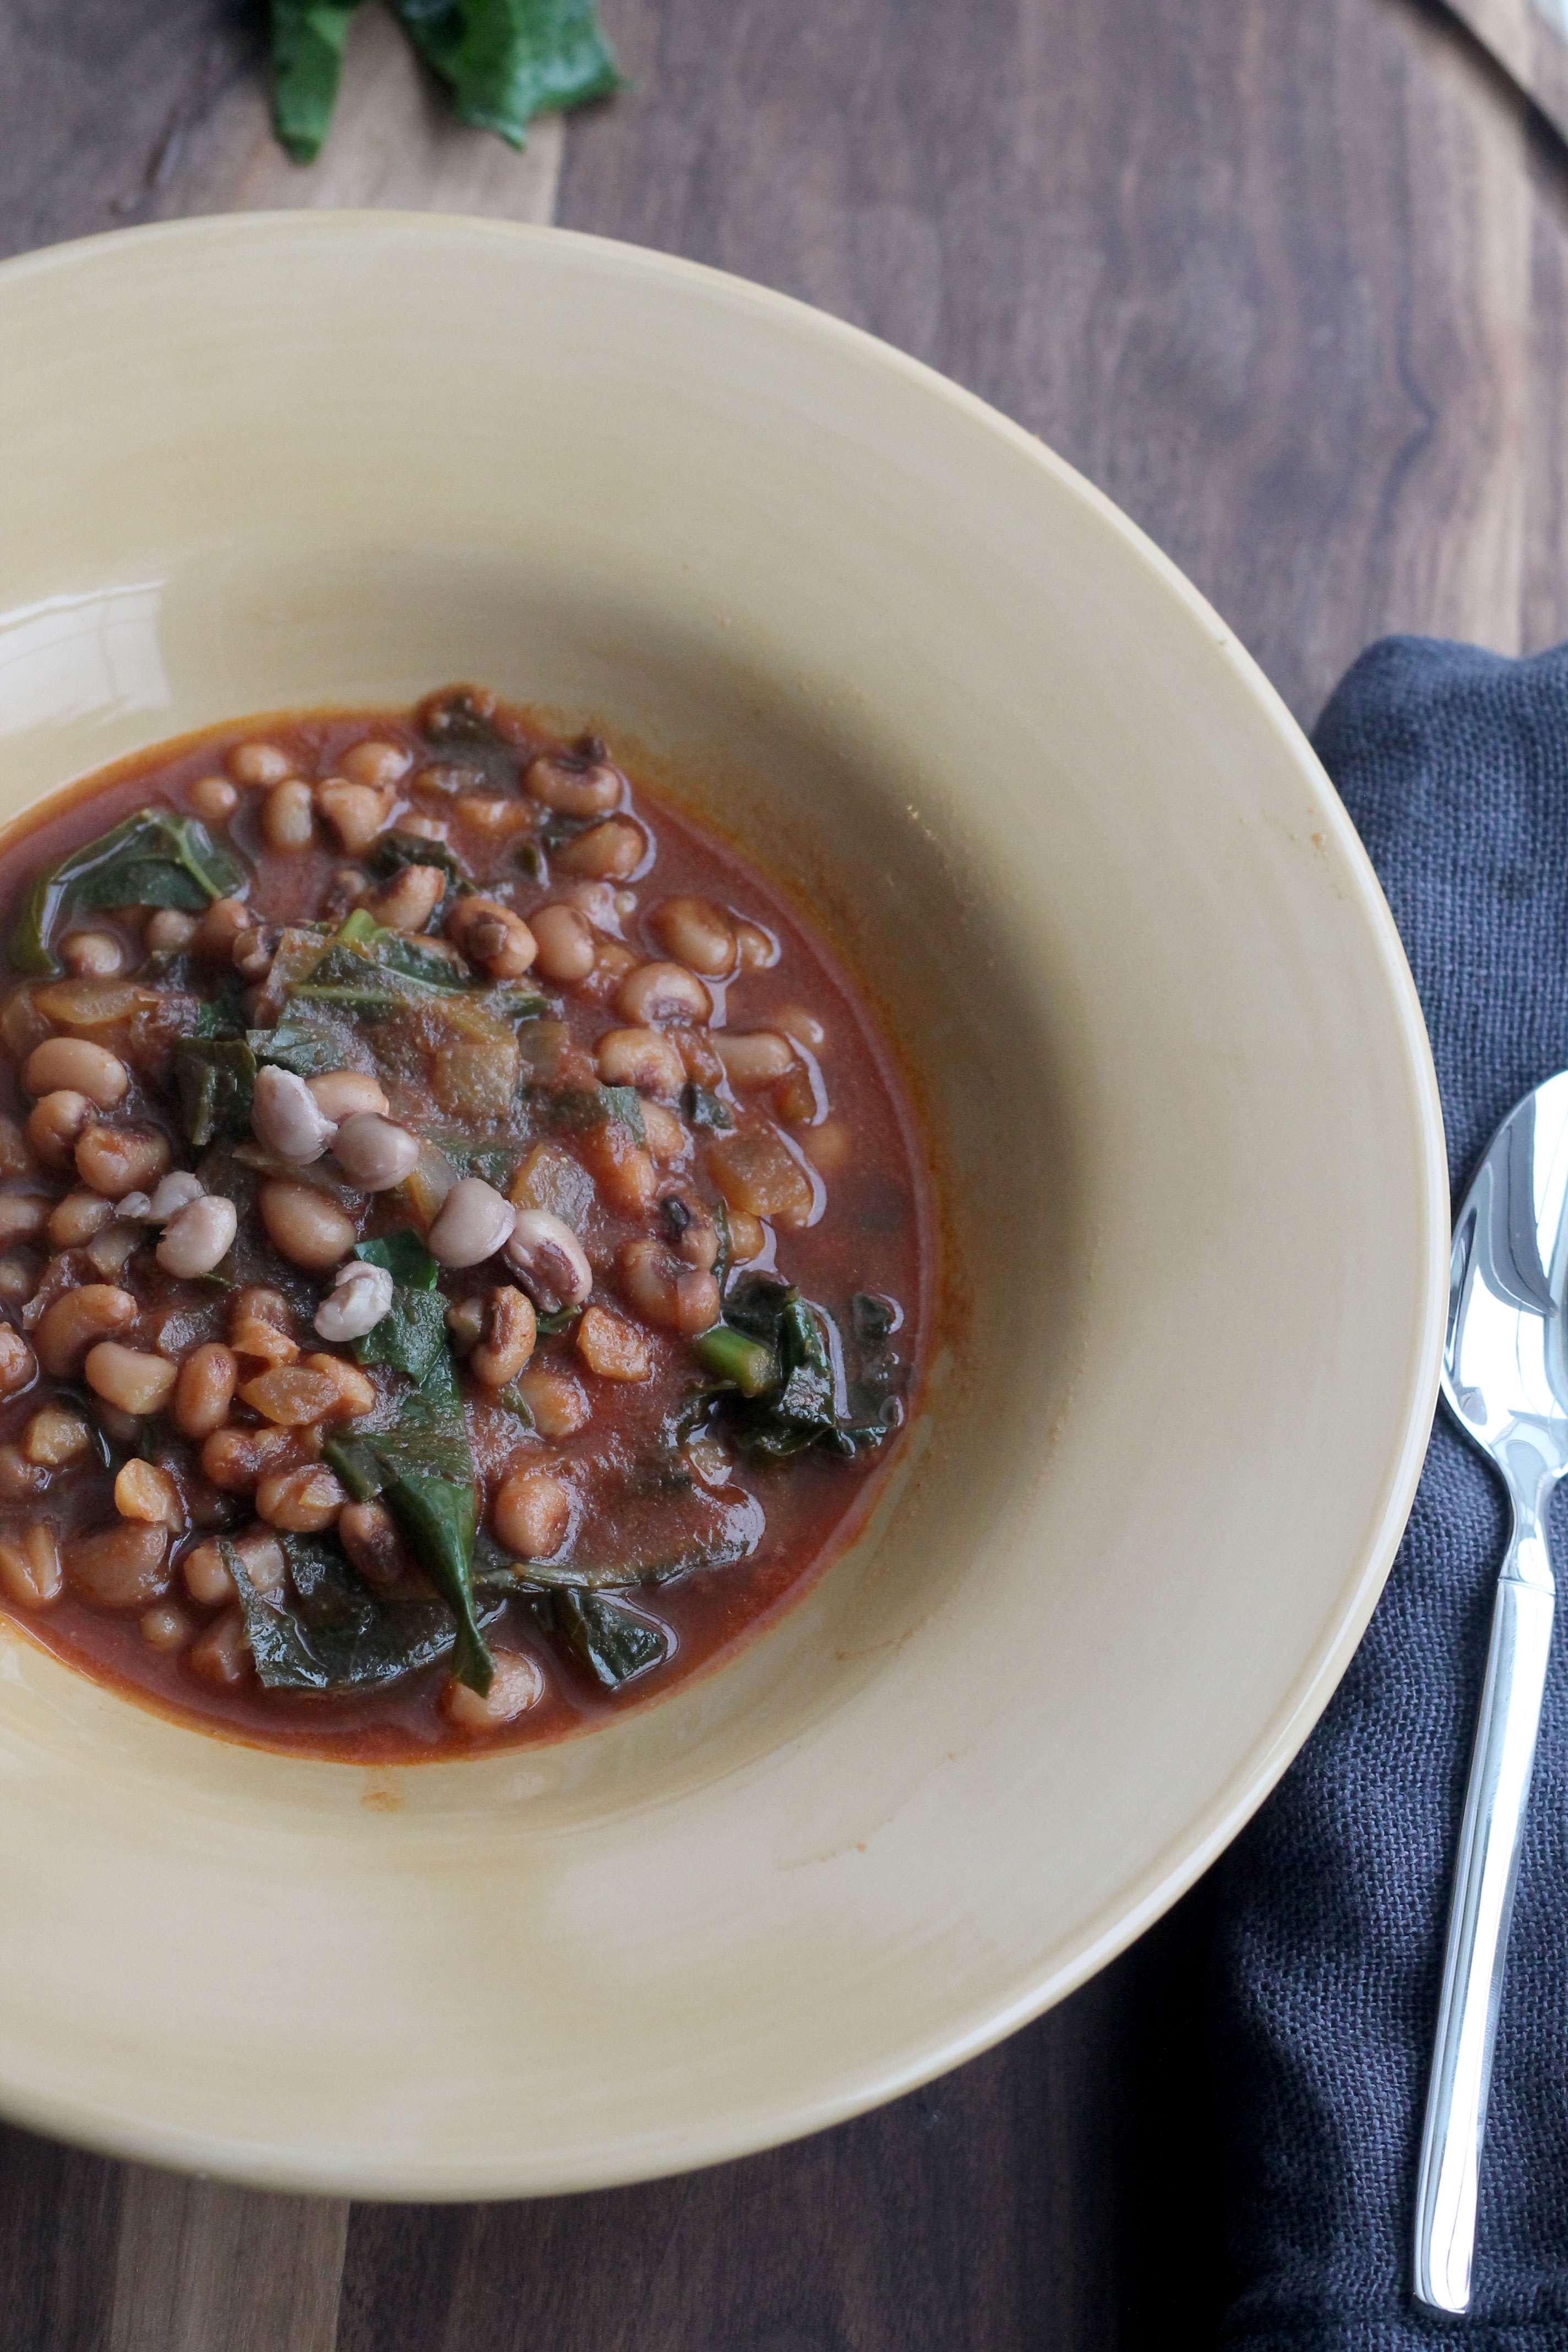 Ring in the New Year with this Black Eyed Peas and Collard Greens Soup